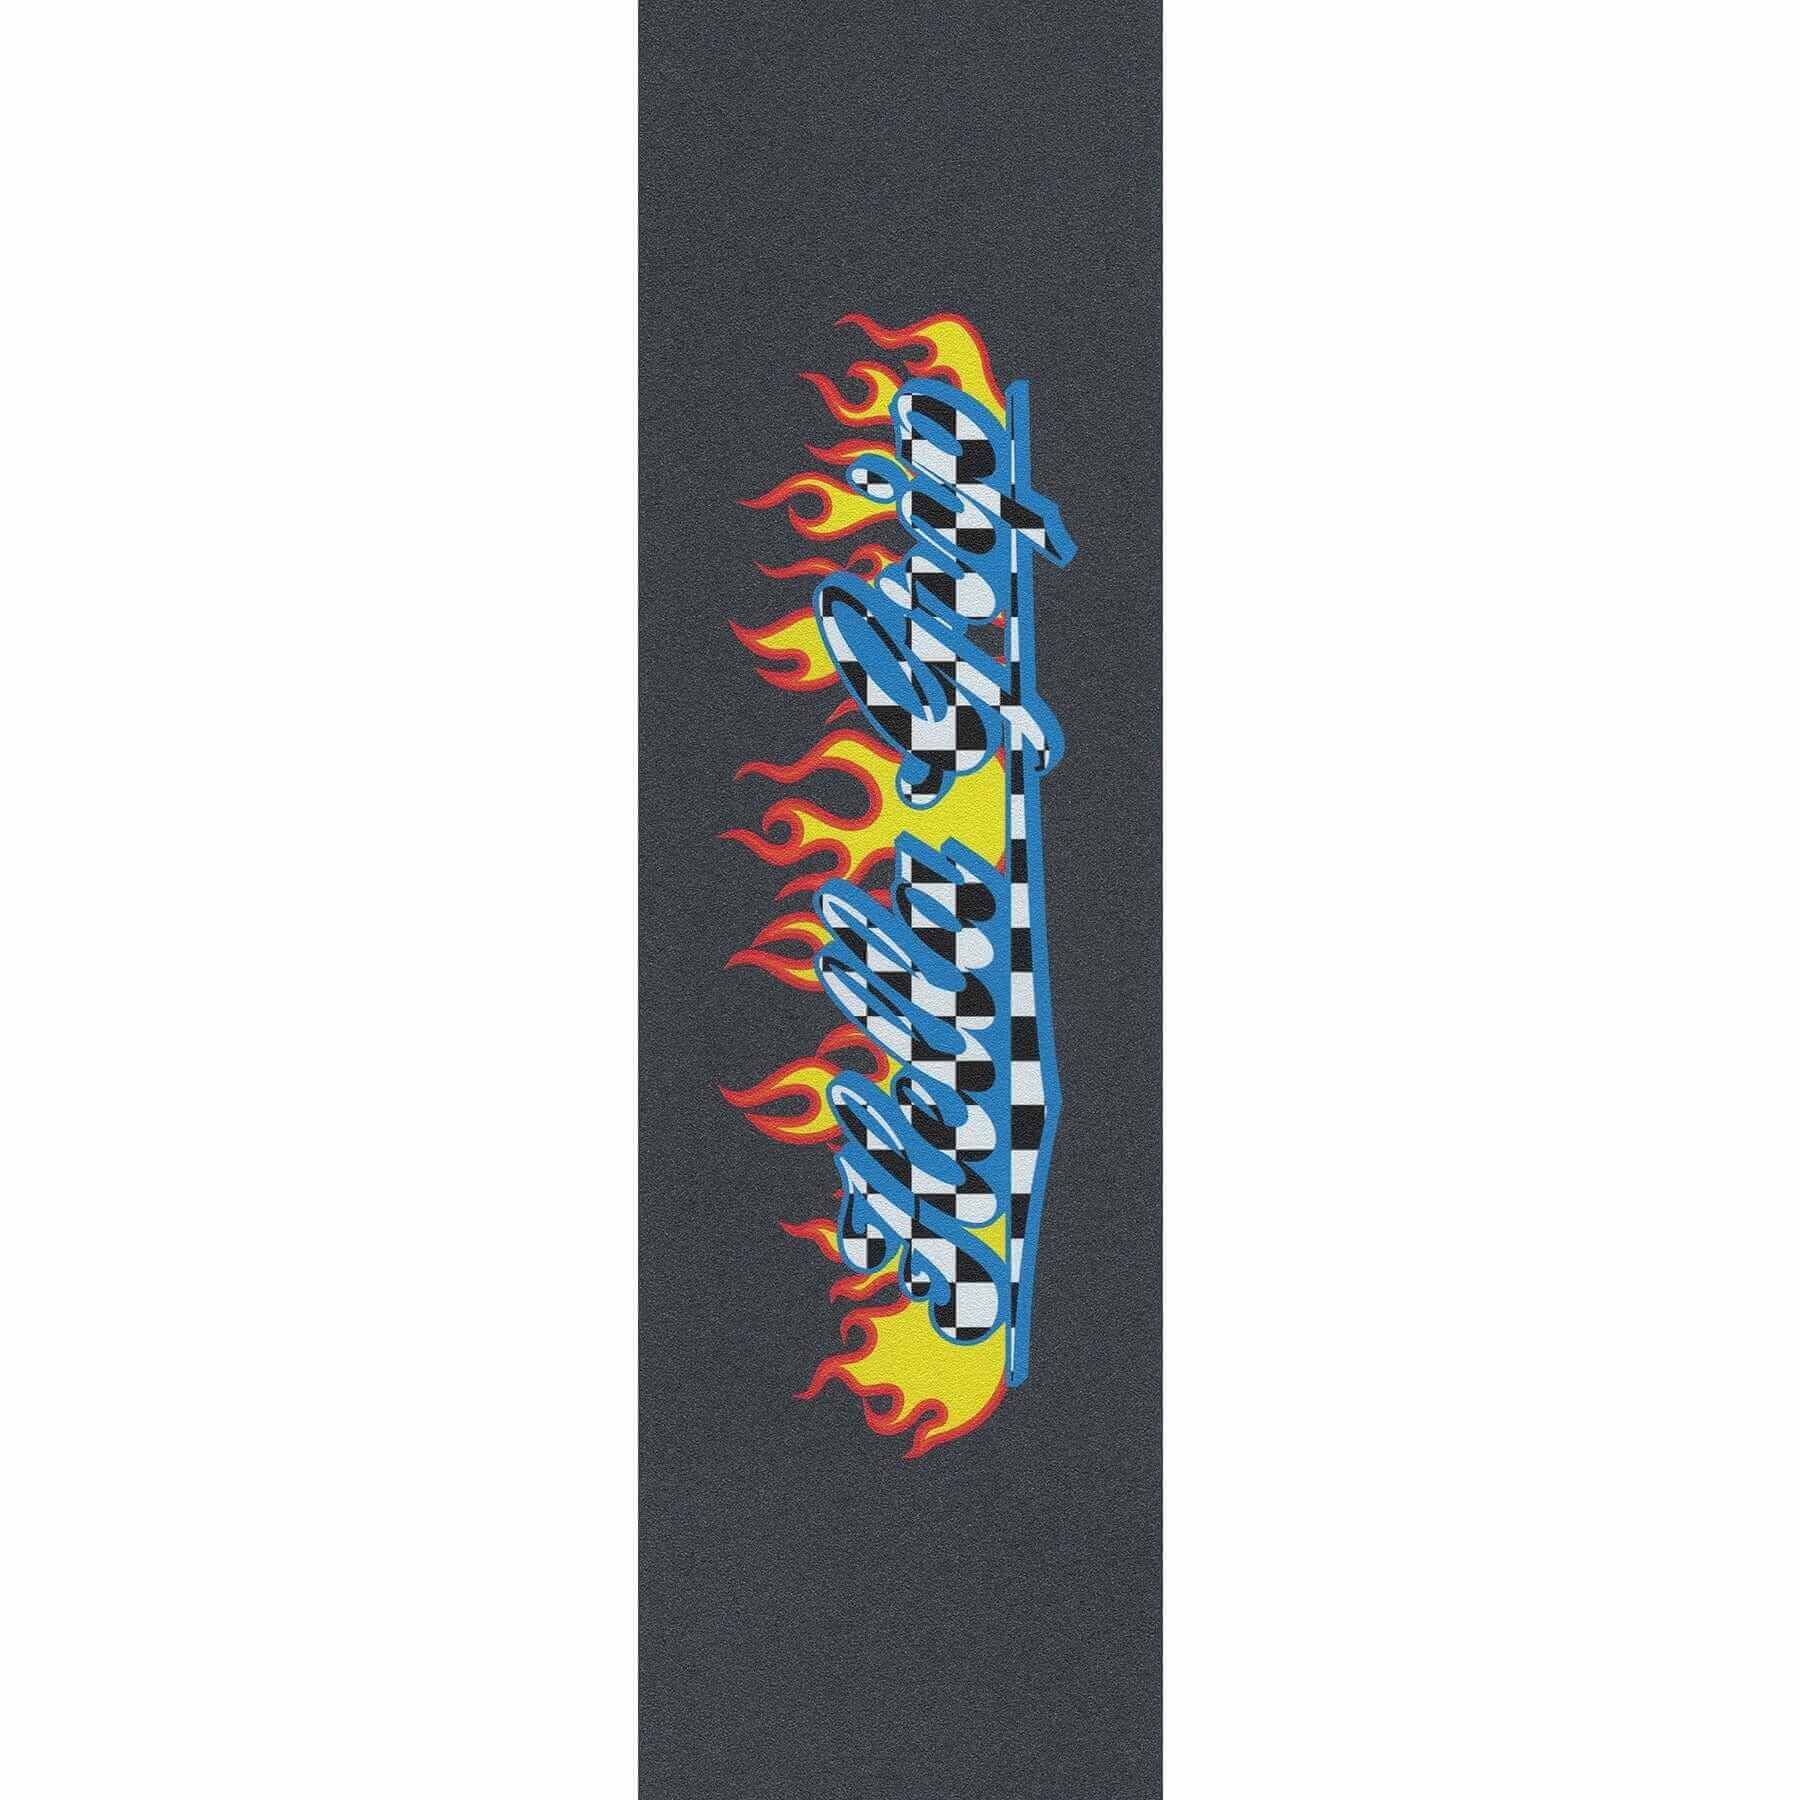 Hella Classic Hot Wheels Grip Tape |GRIP TAPE |$12.95 |TSP The Shop | Hella Classic Hot Wheels Grip Tape | The Shop Pro Scooter Lab